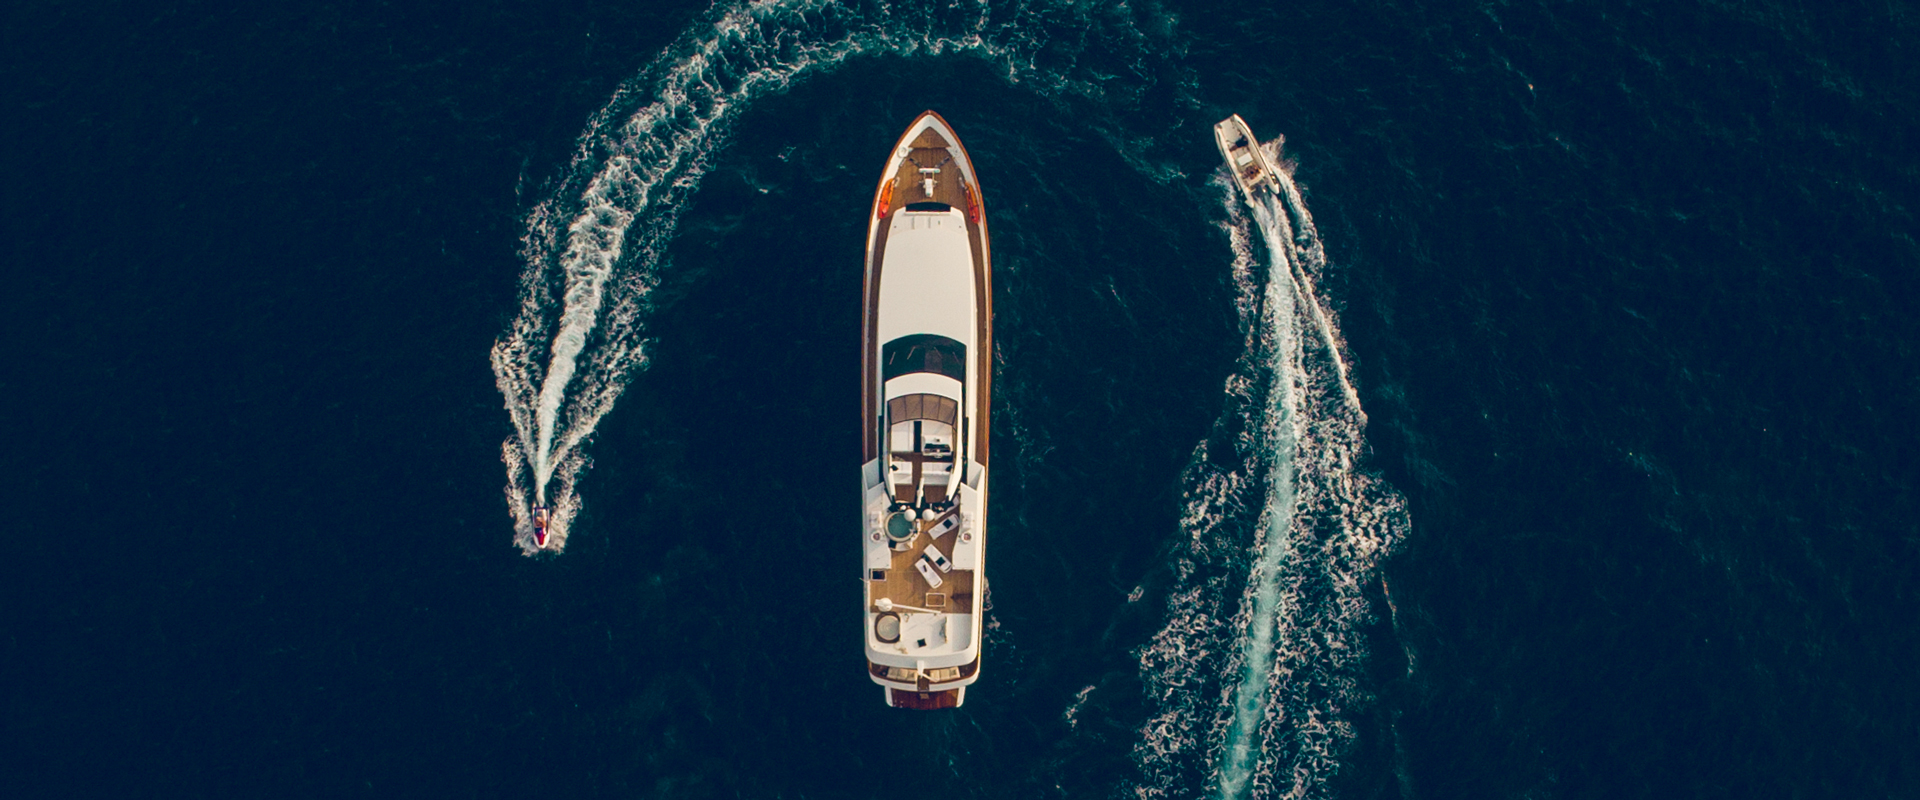 Motor-yacht-sailing-brand-video-promo-corporate-lifestyle-models